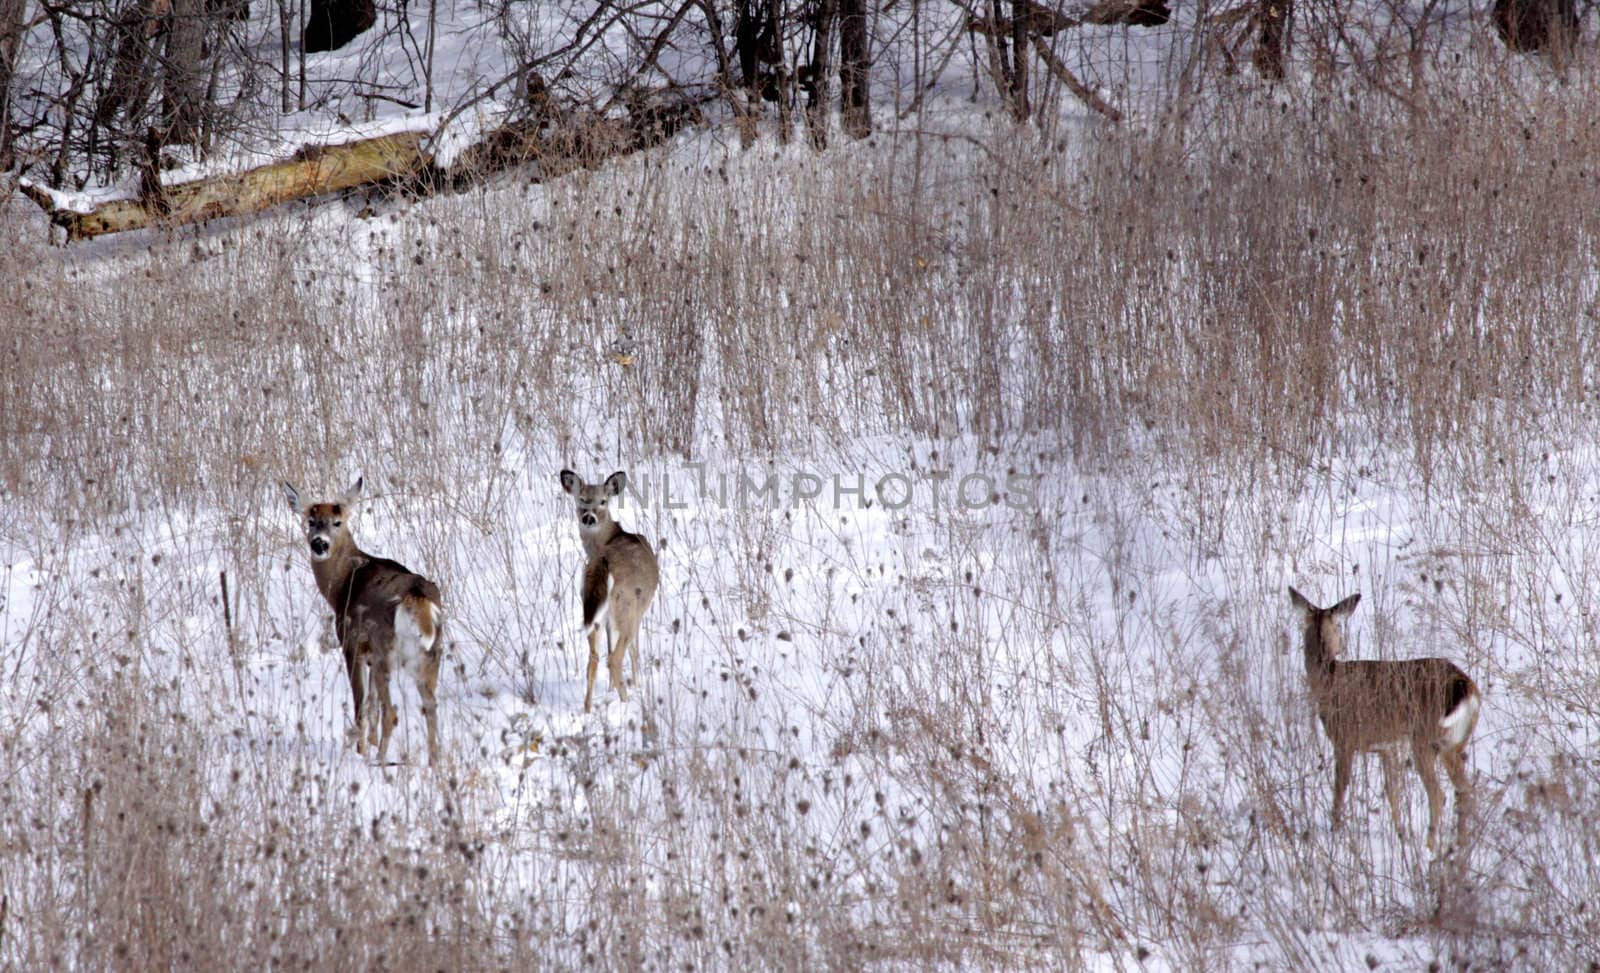 Three white-tailed deer (Odocoileus virginianus) in a snow covered field, in Ontario, Canada.
